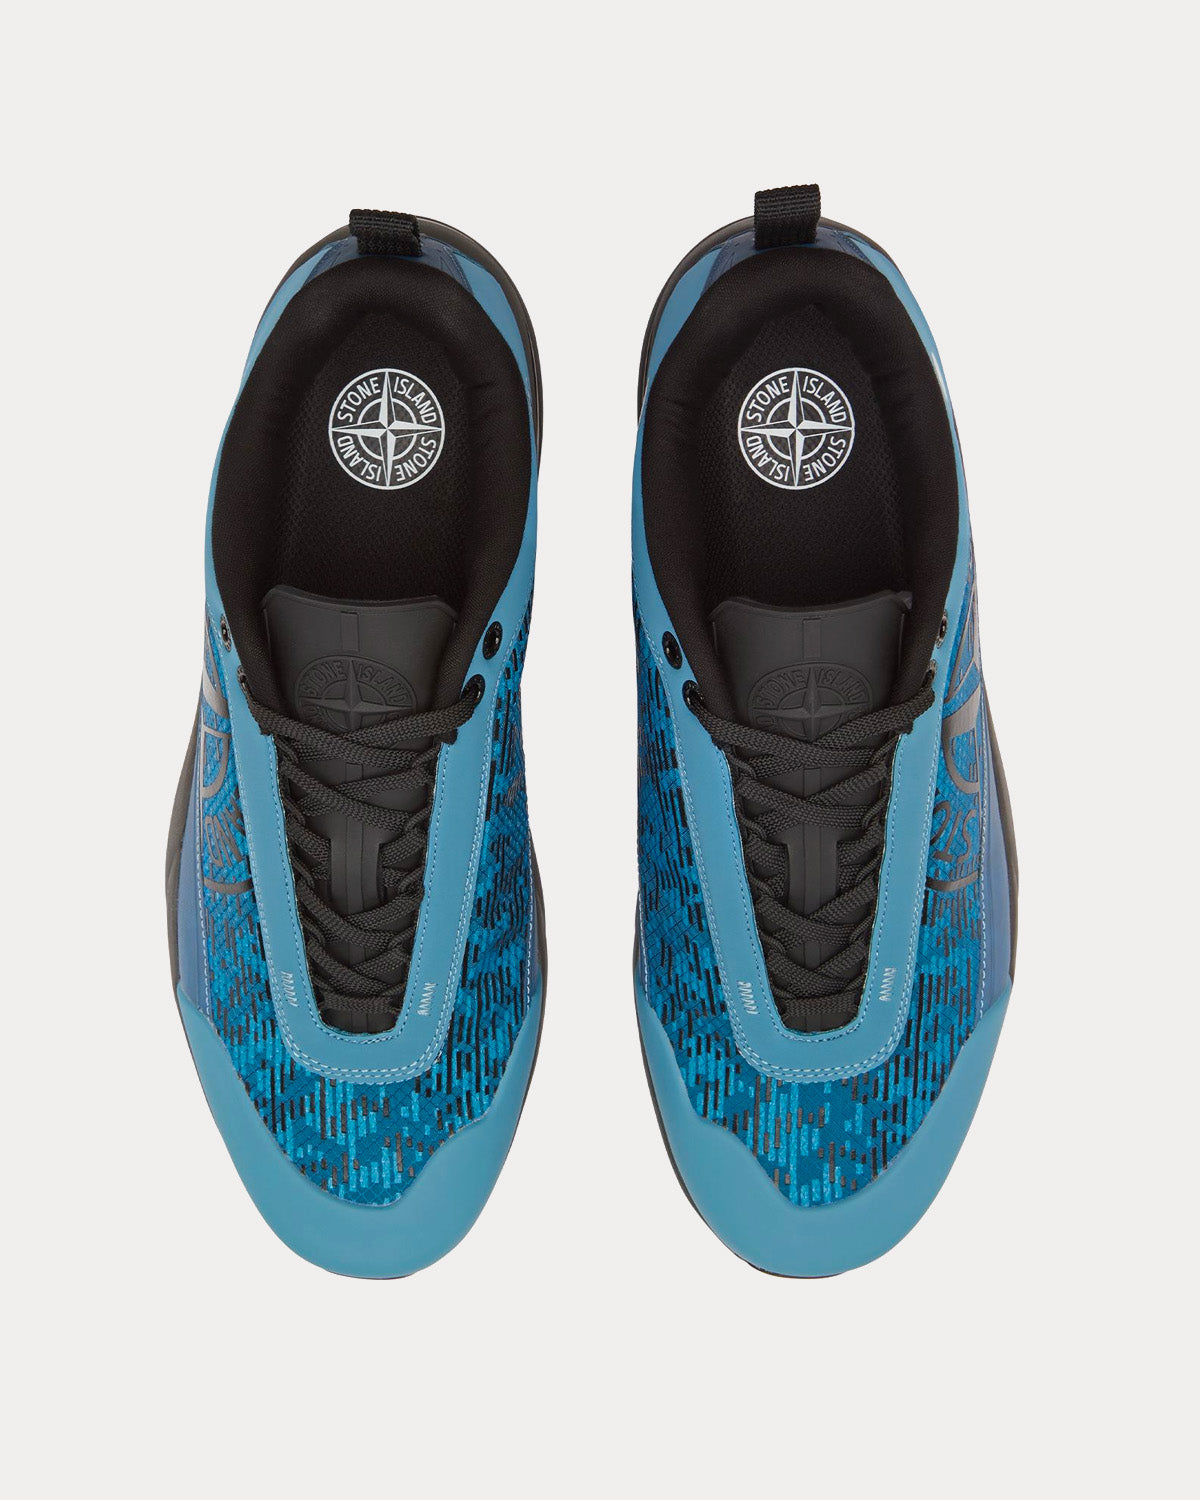 Stone Island - S0303 Turquoise Low Top Sneakers